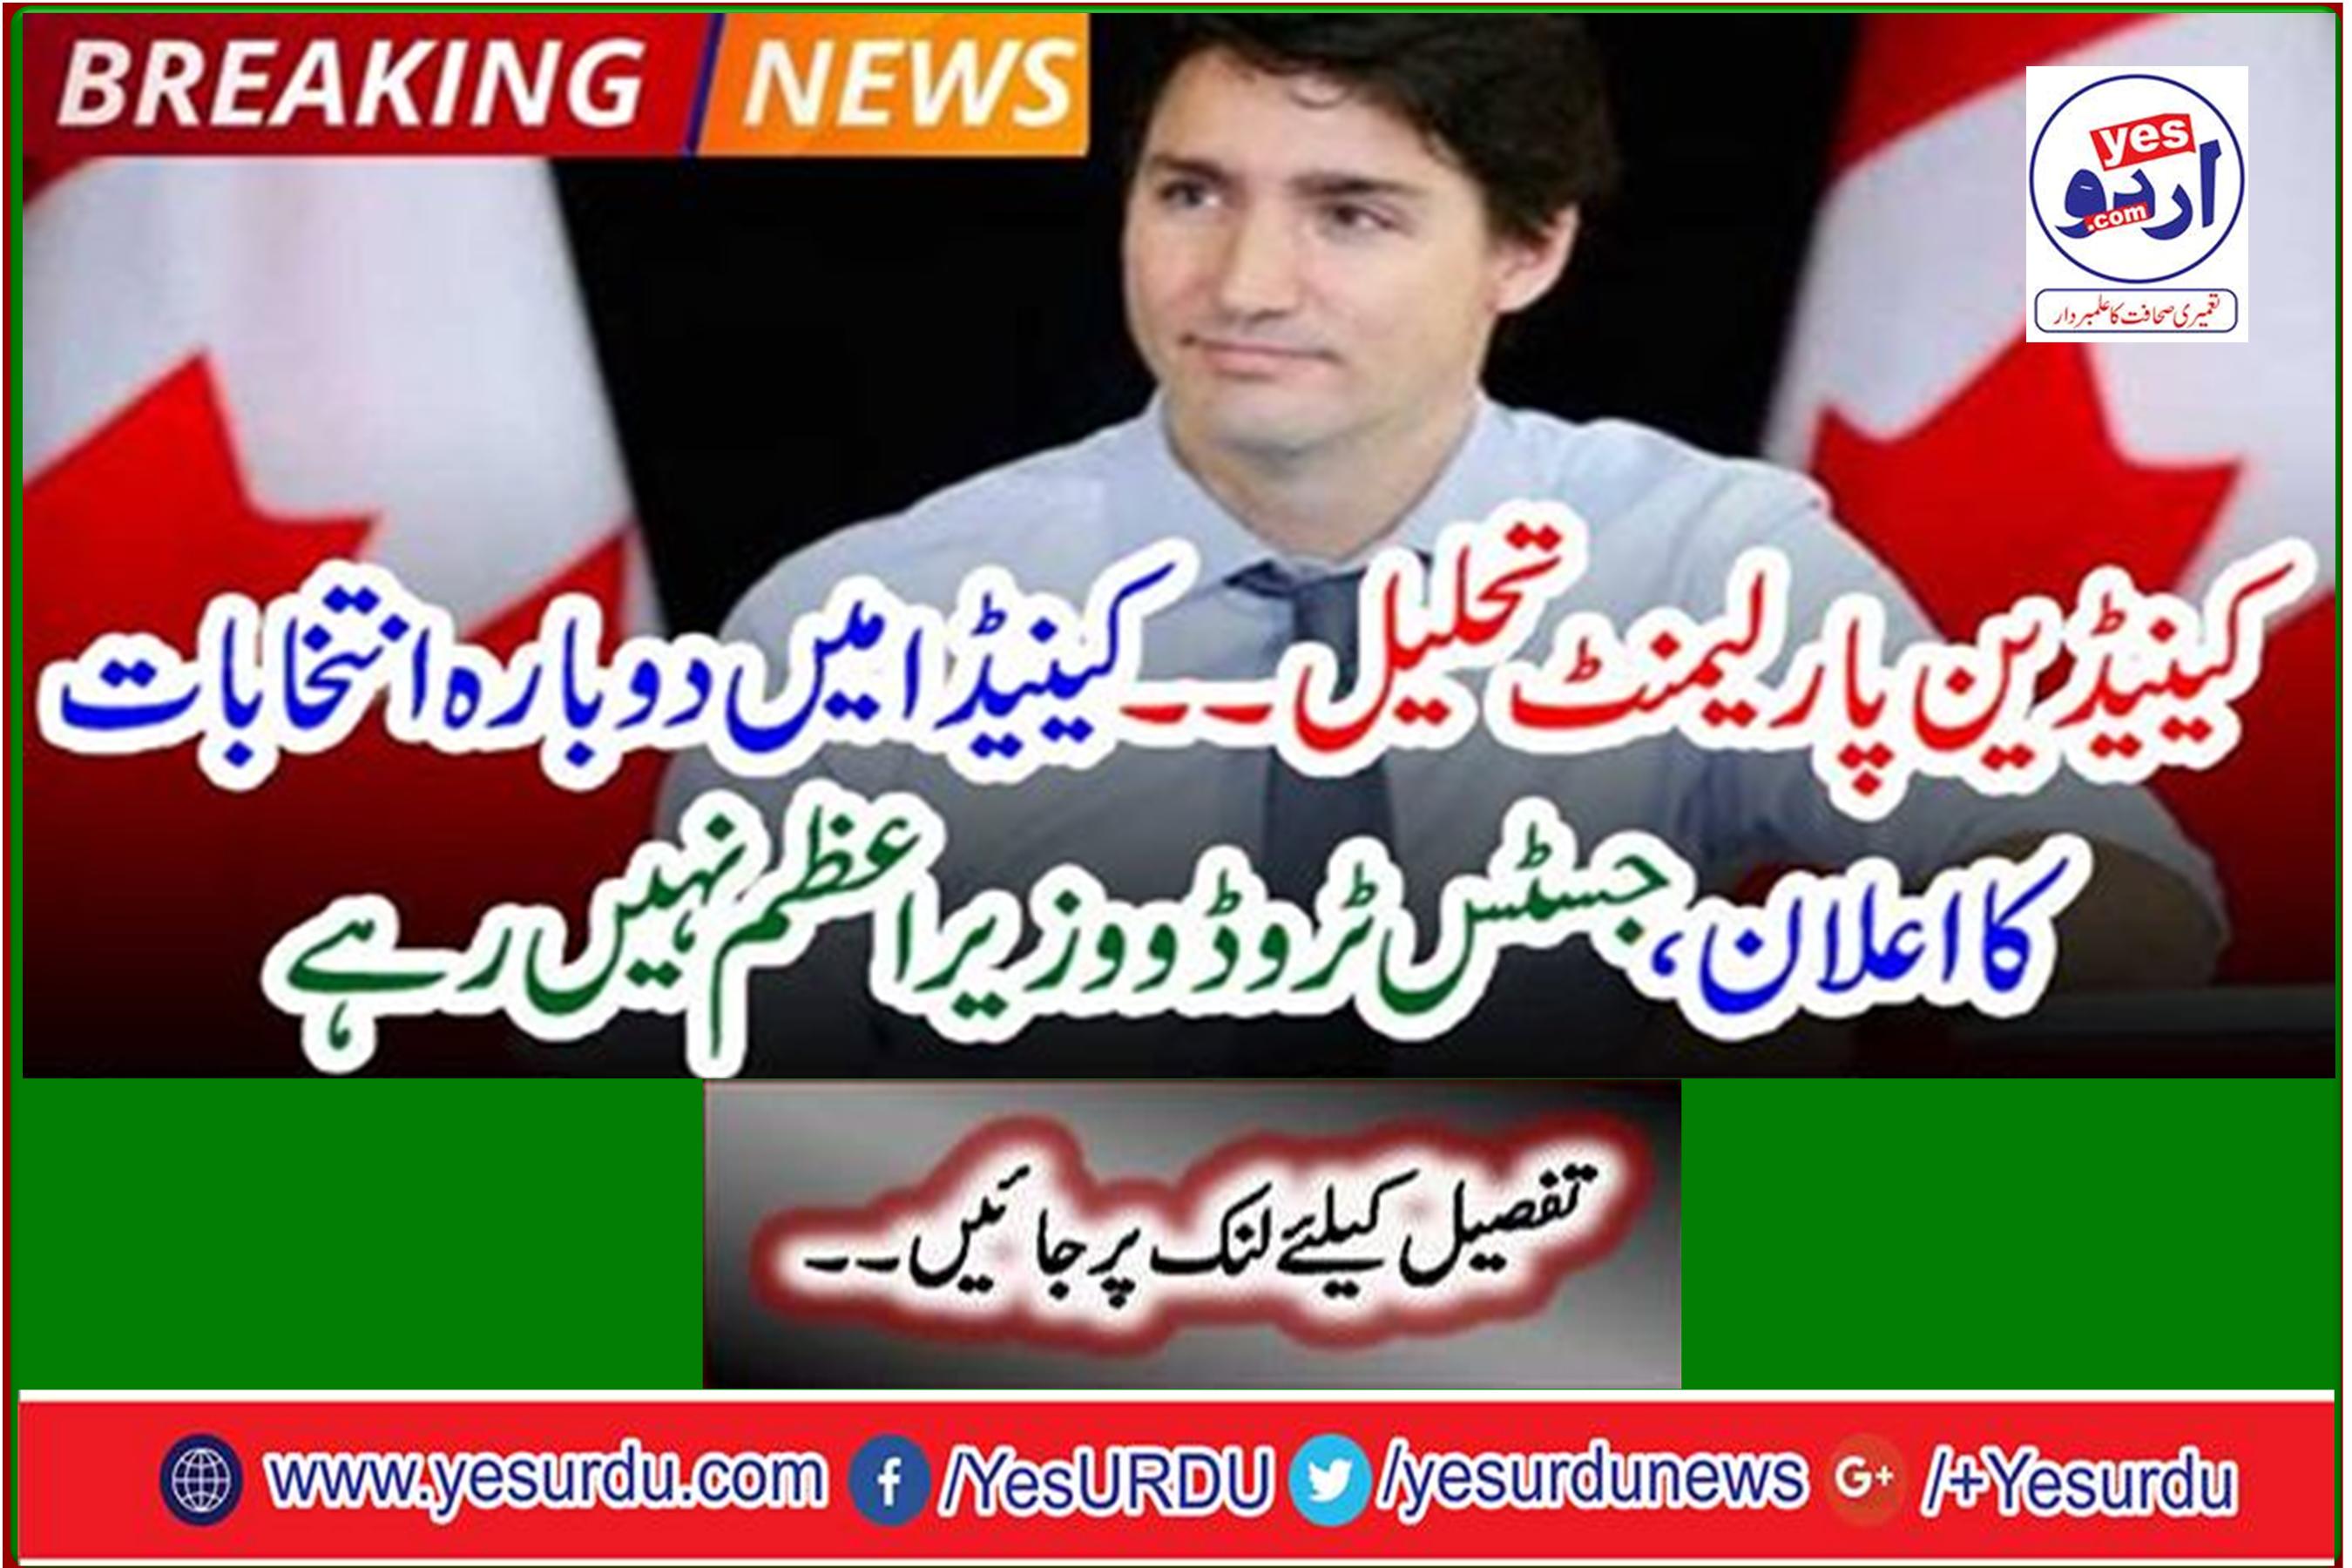 Canadian Parliament dissolved - Justice Trudeau no longer prime minister, re-election in Canada